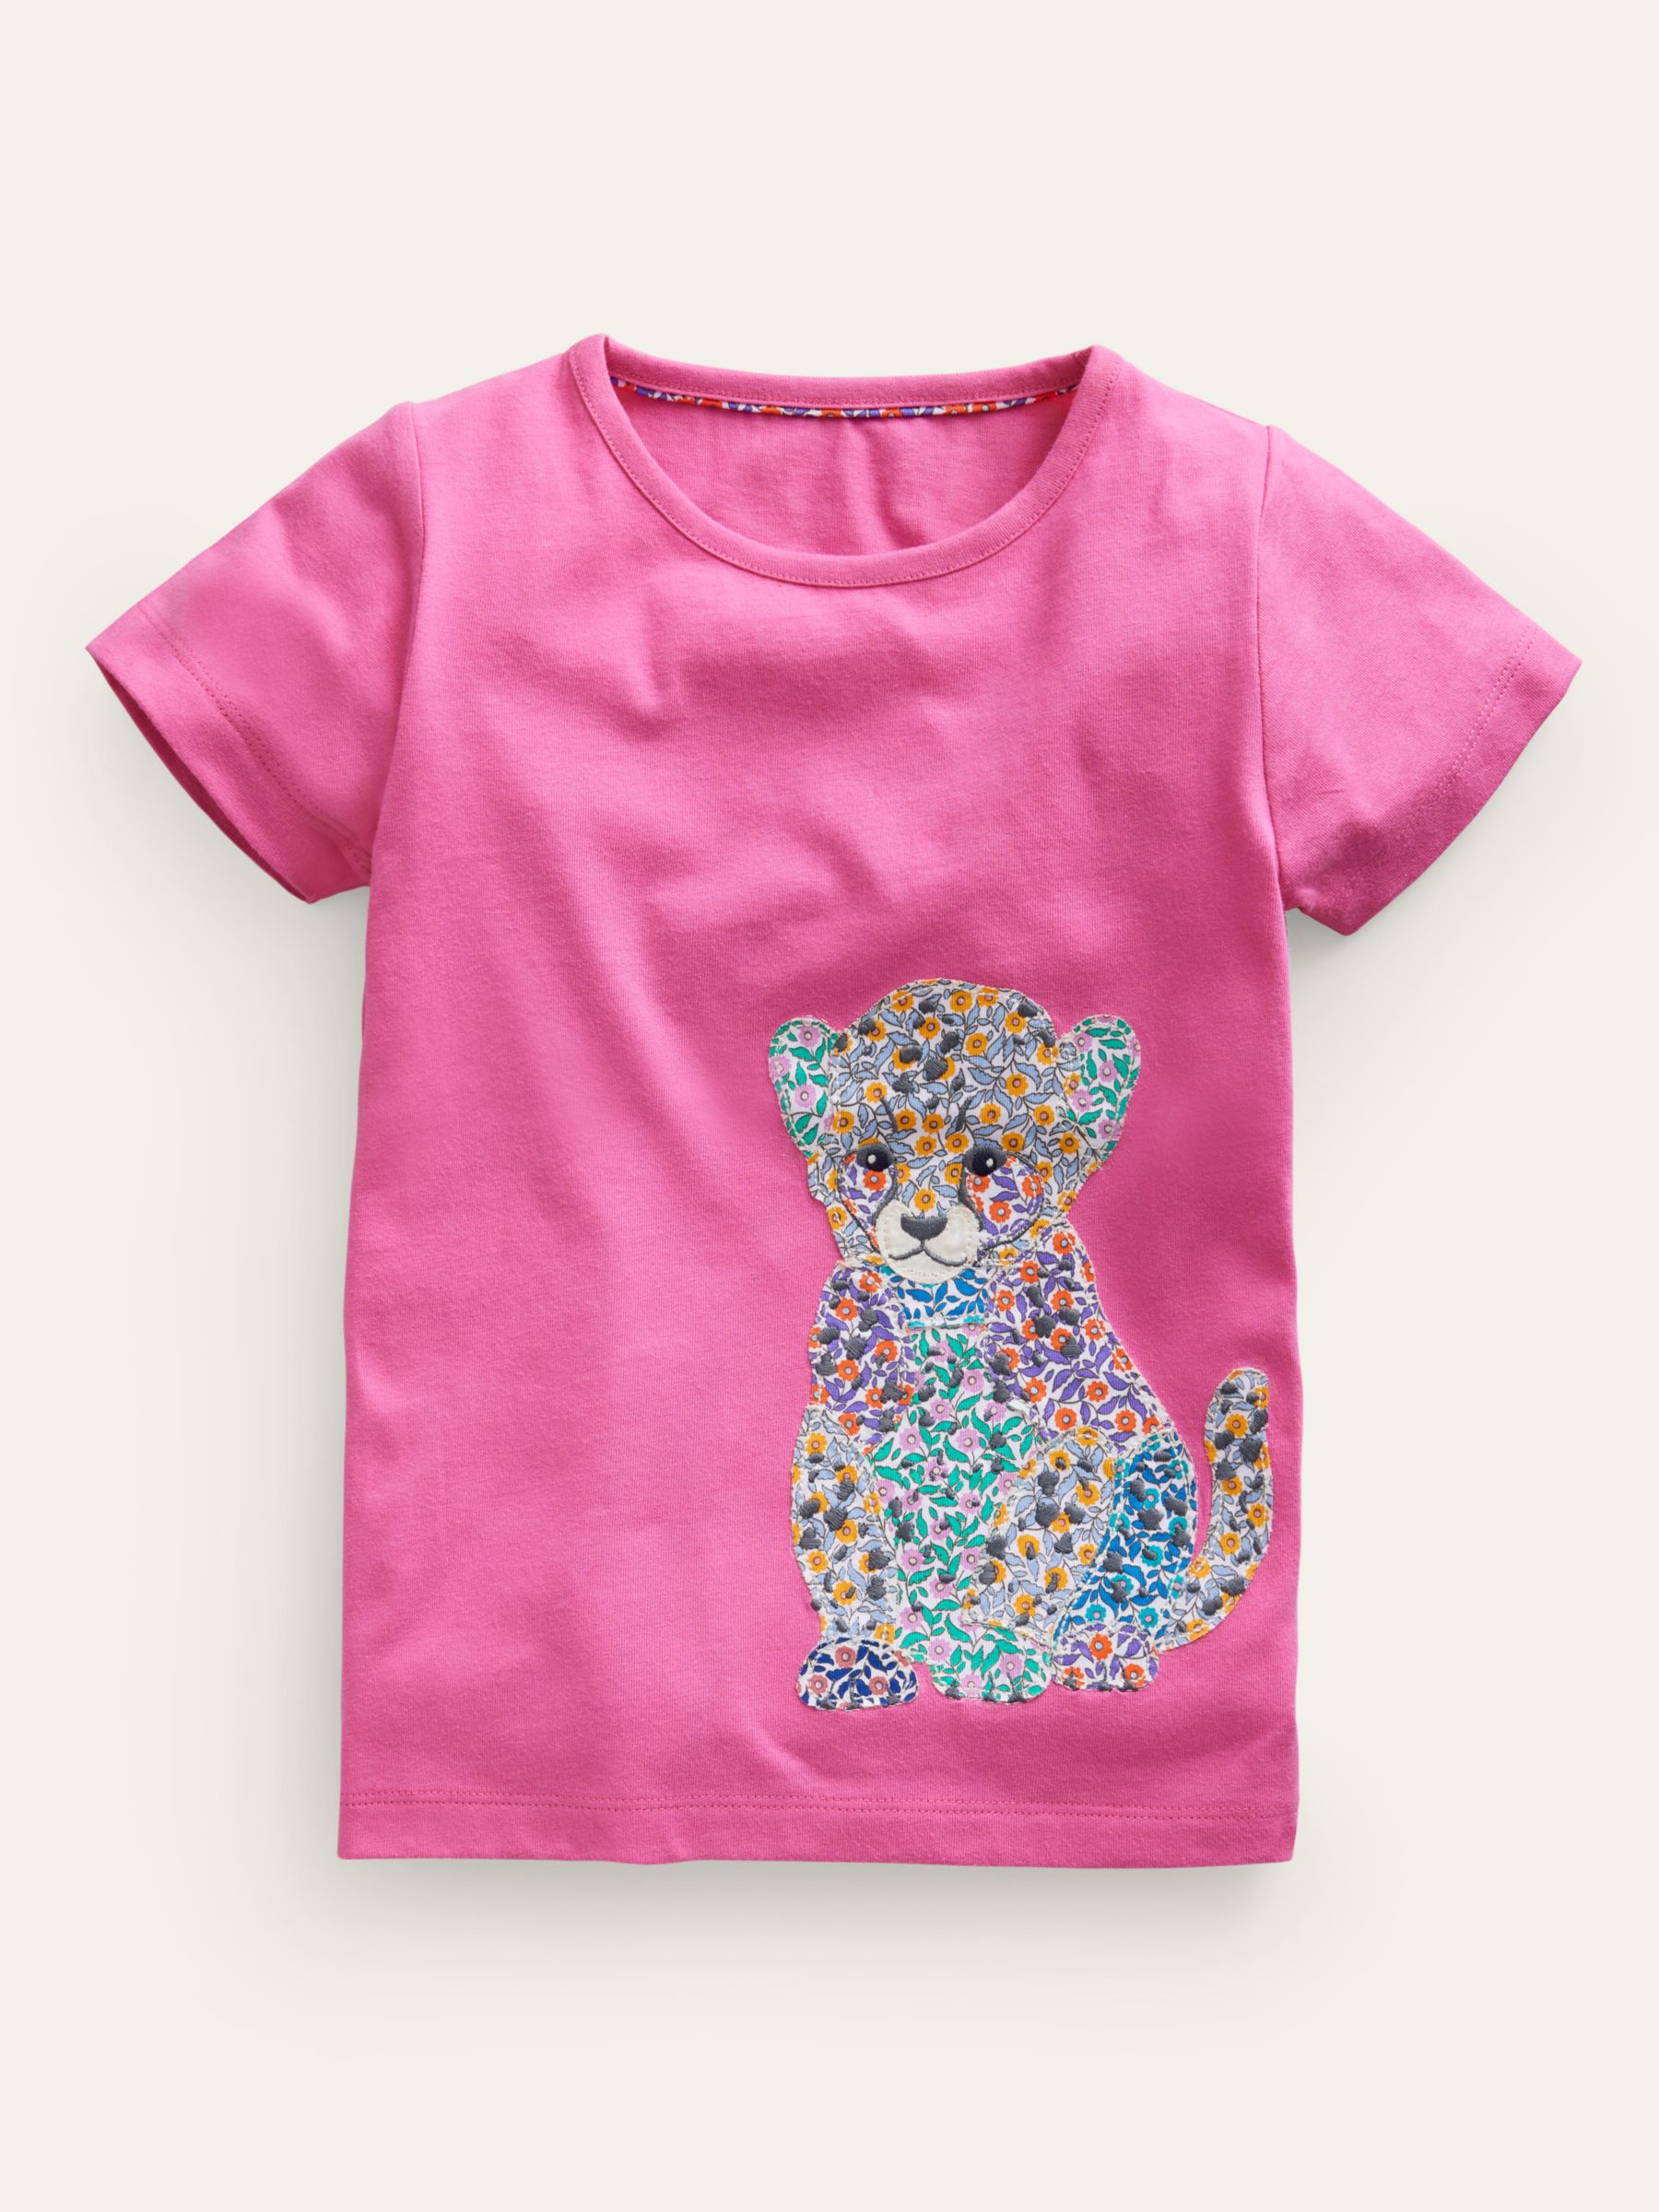 Mini Boden Kids' Baby Tiger Applique Short Sleeve T-Shirt, Pink/Multi, 2-3 years